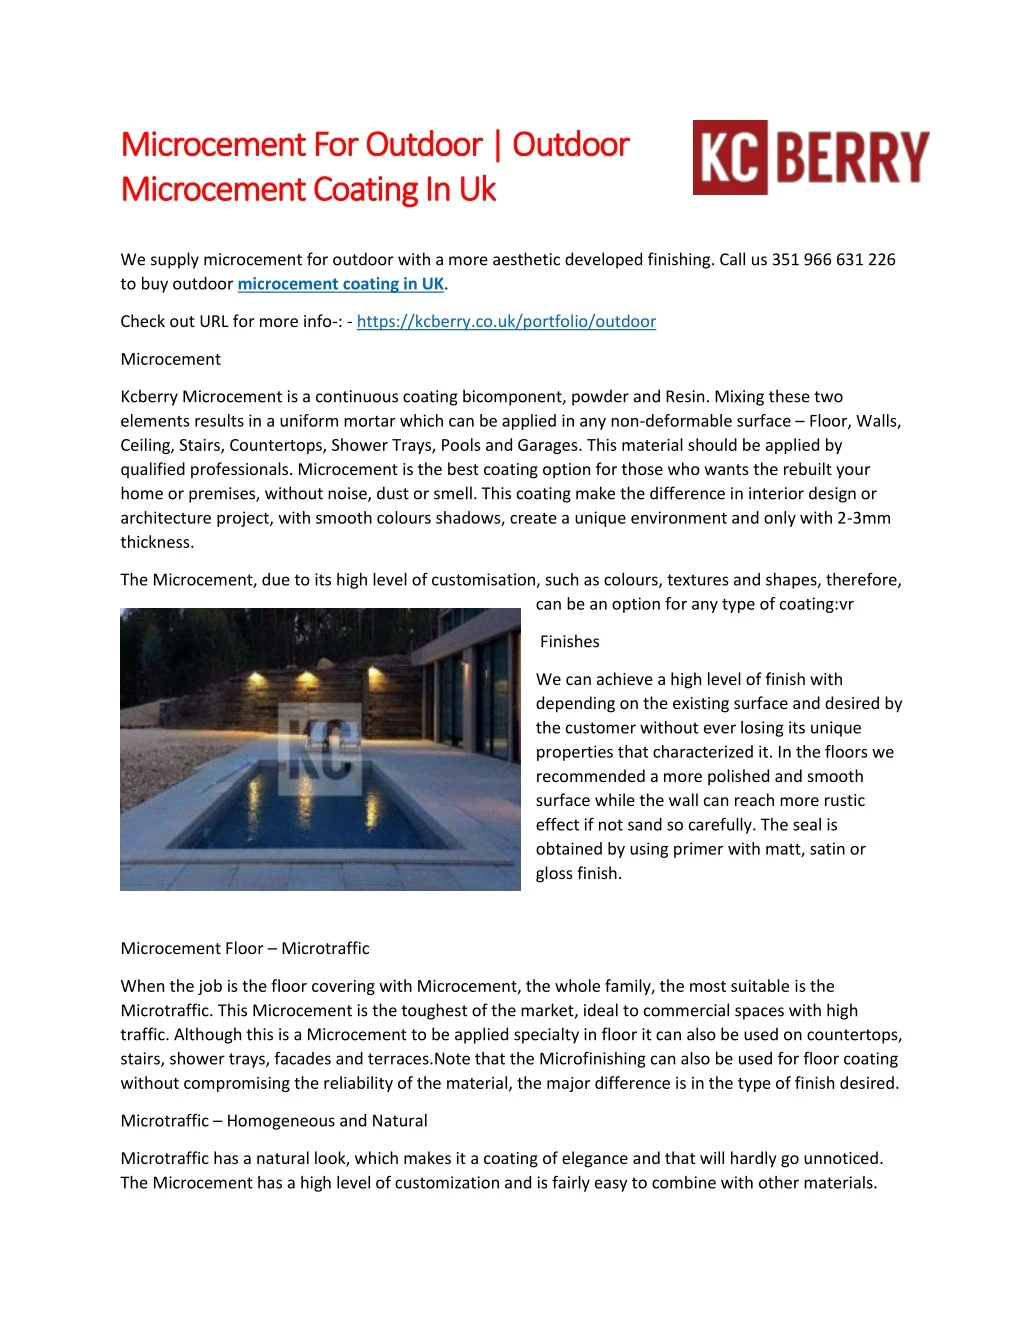 microcement for outdoor outdoor microcement